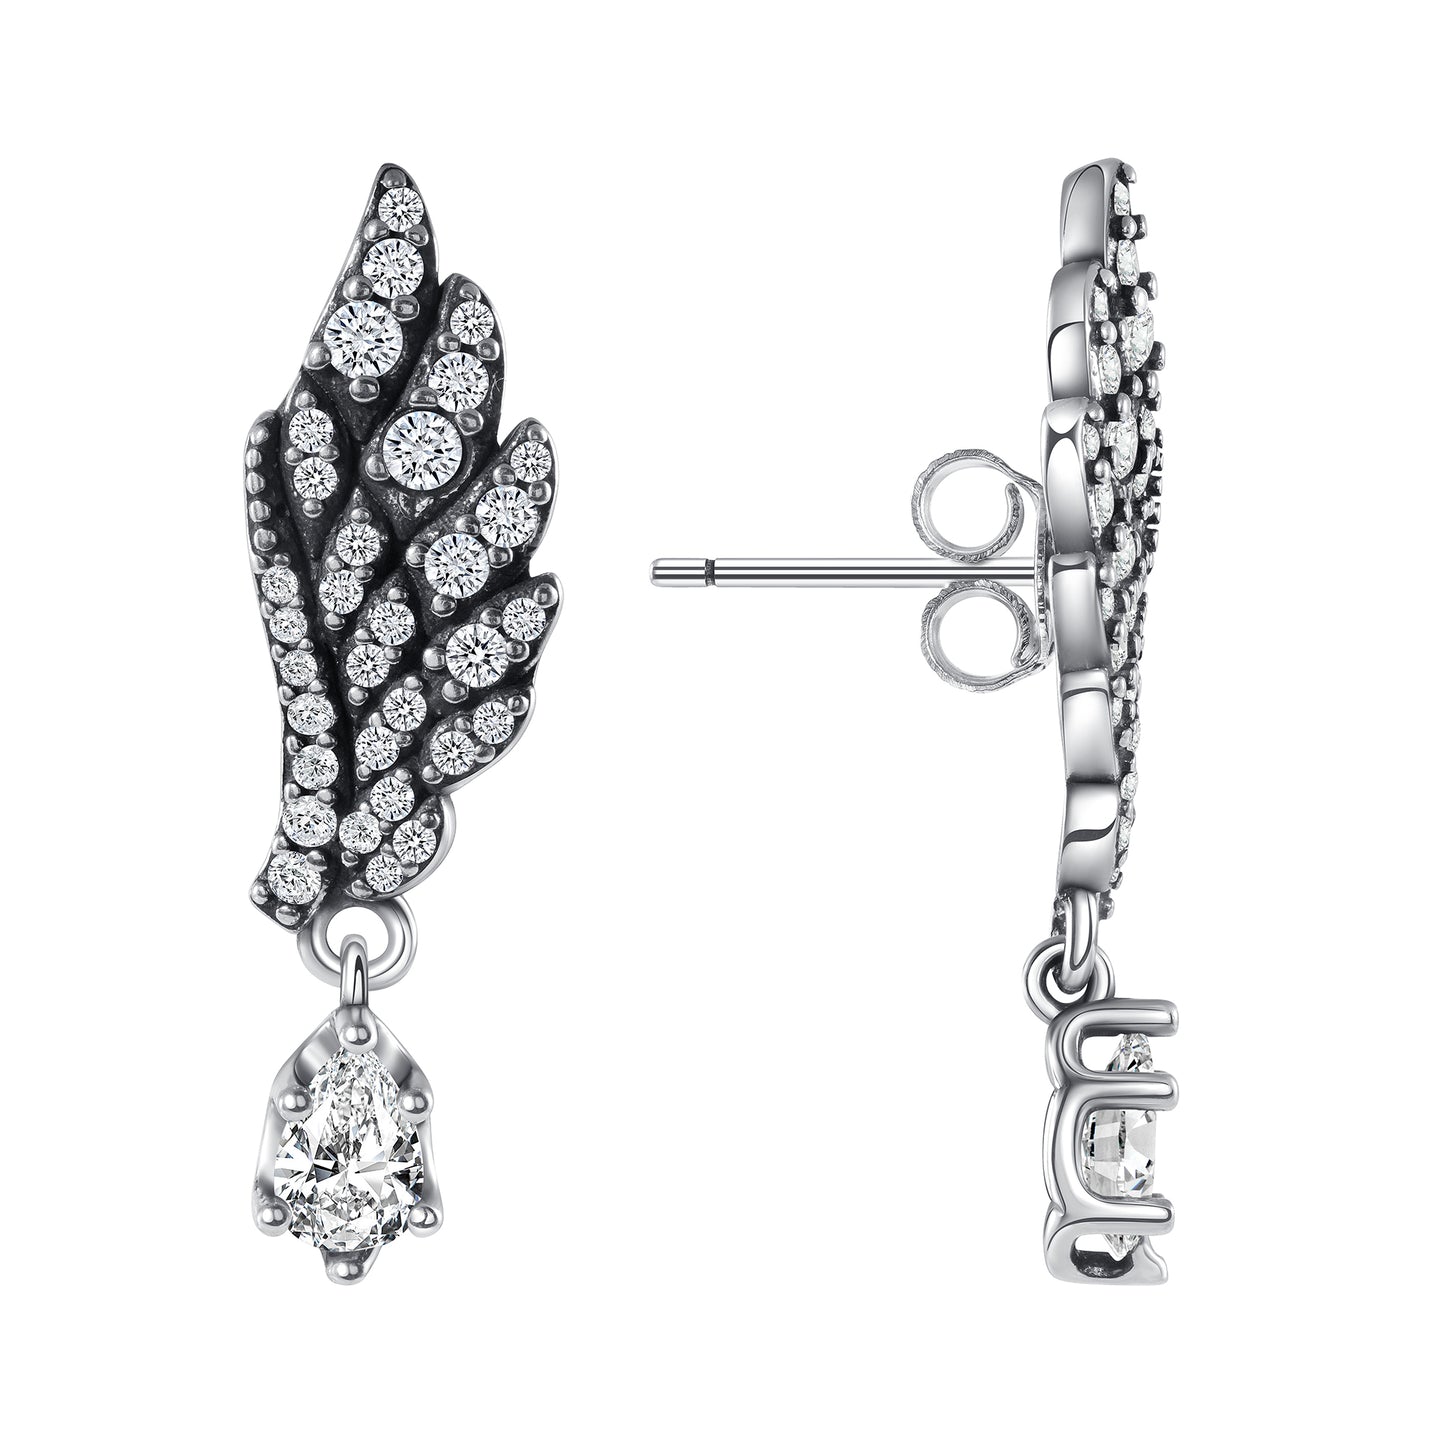 Silver 925 Rhodium Plated Angel Wing Dangling Cubic Zirconia Earring Stud. E10111